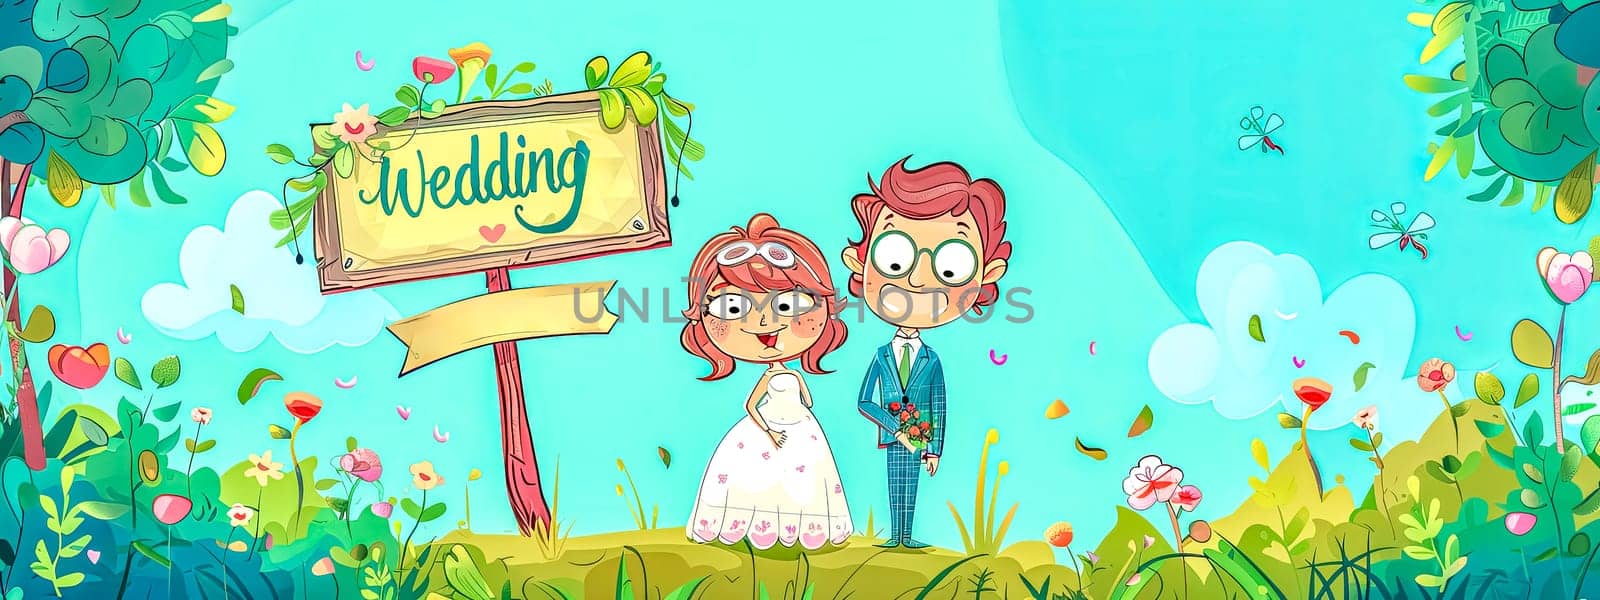 Colorful and vibrant whimsical wedding cartoon illustration featuring a cute couple. Hand-drawn characters. And a lively floral background